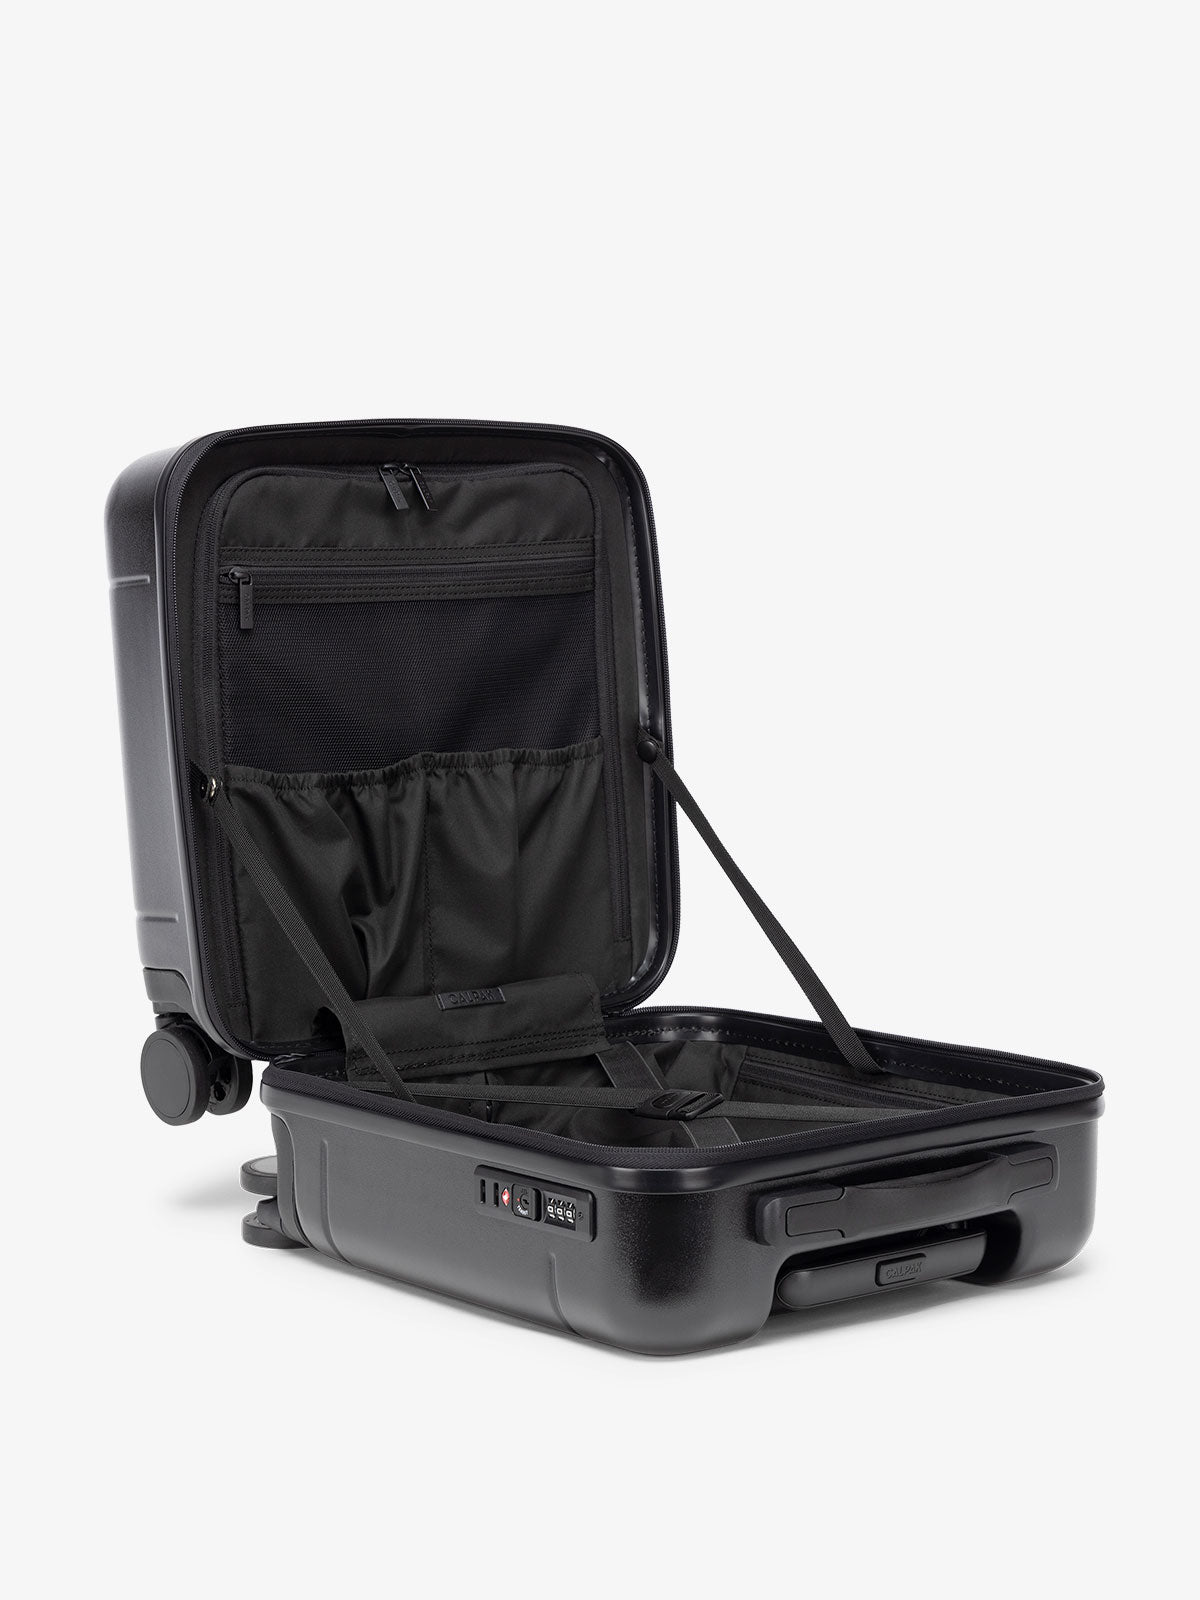 Hue mini carry on with multiple pockets and compression straps